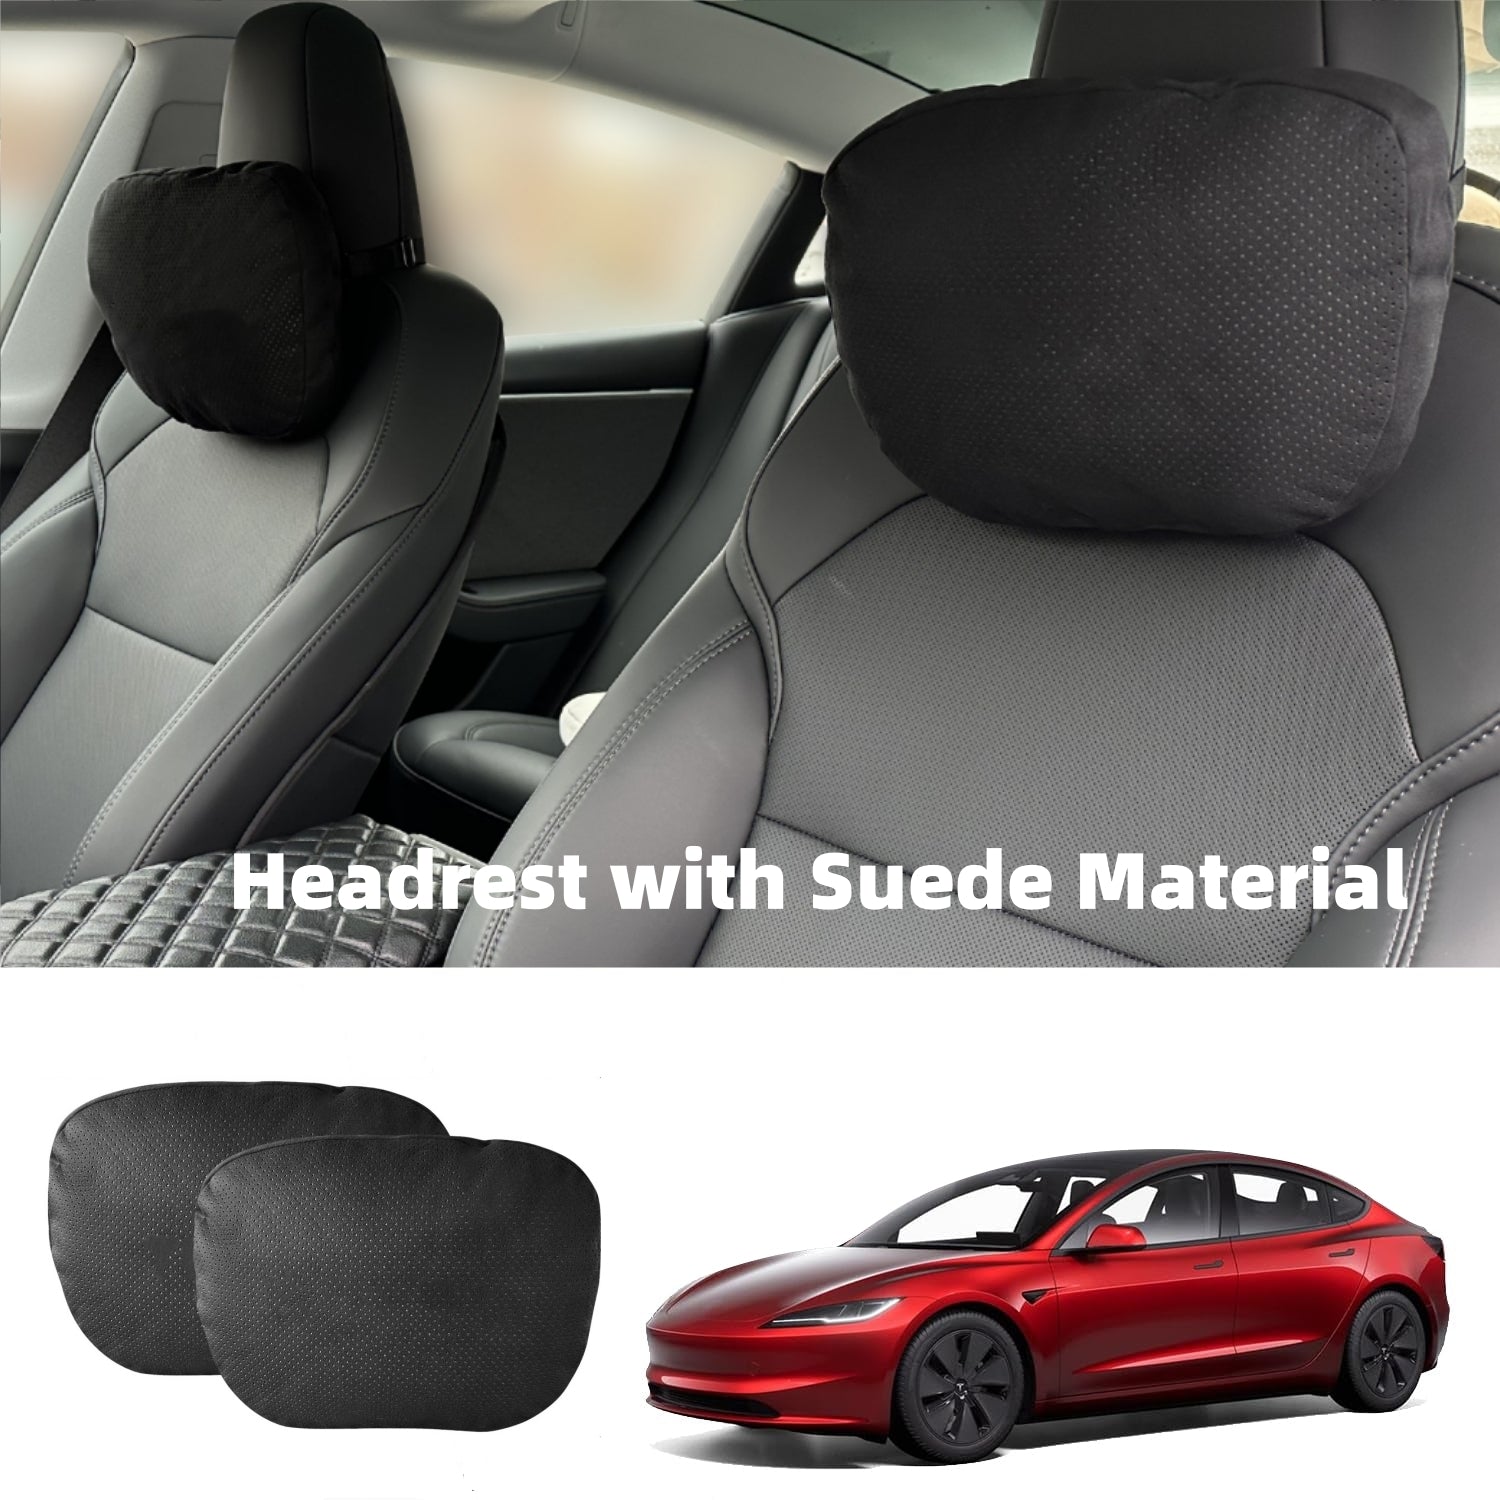 Headrest Pillow for Model 3 highland/3/Y/S/X - Suede Car Neck